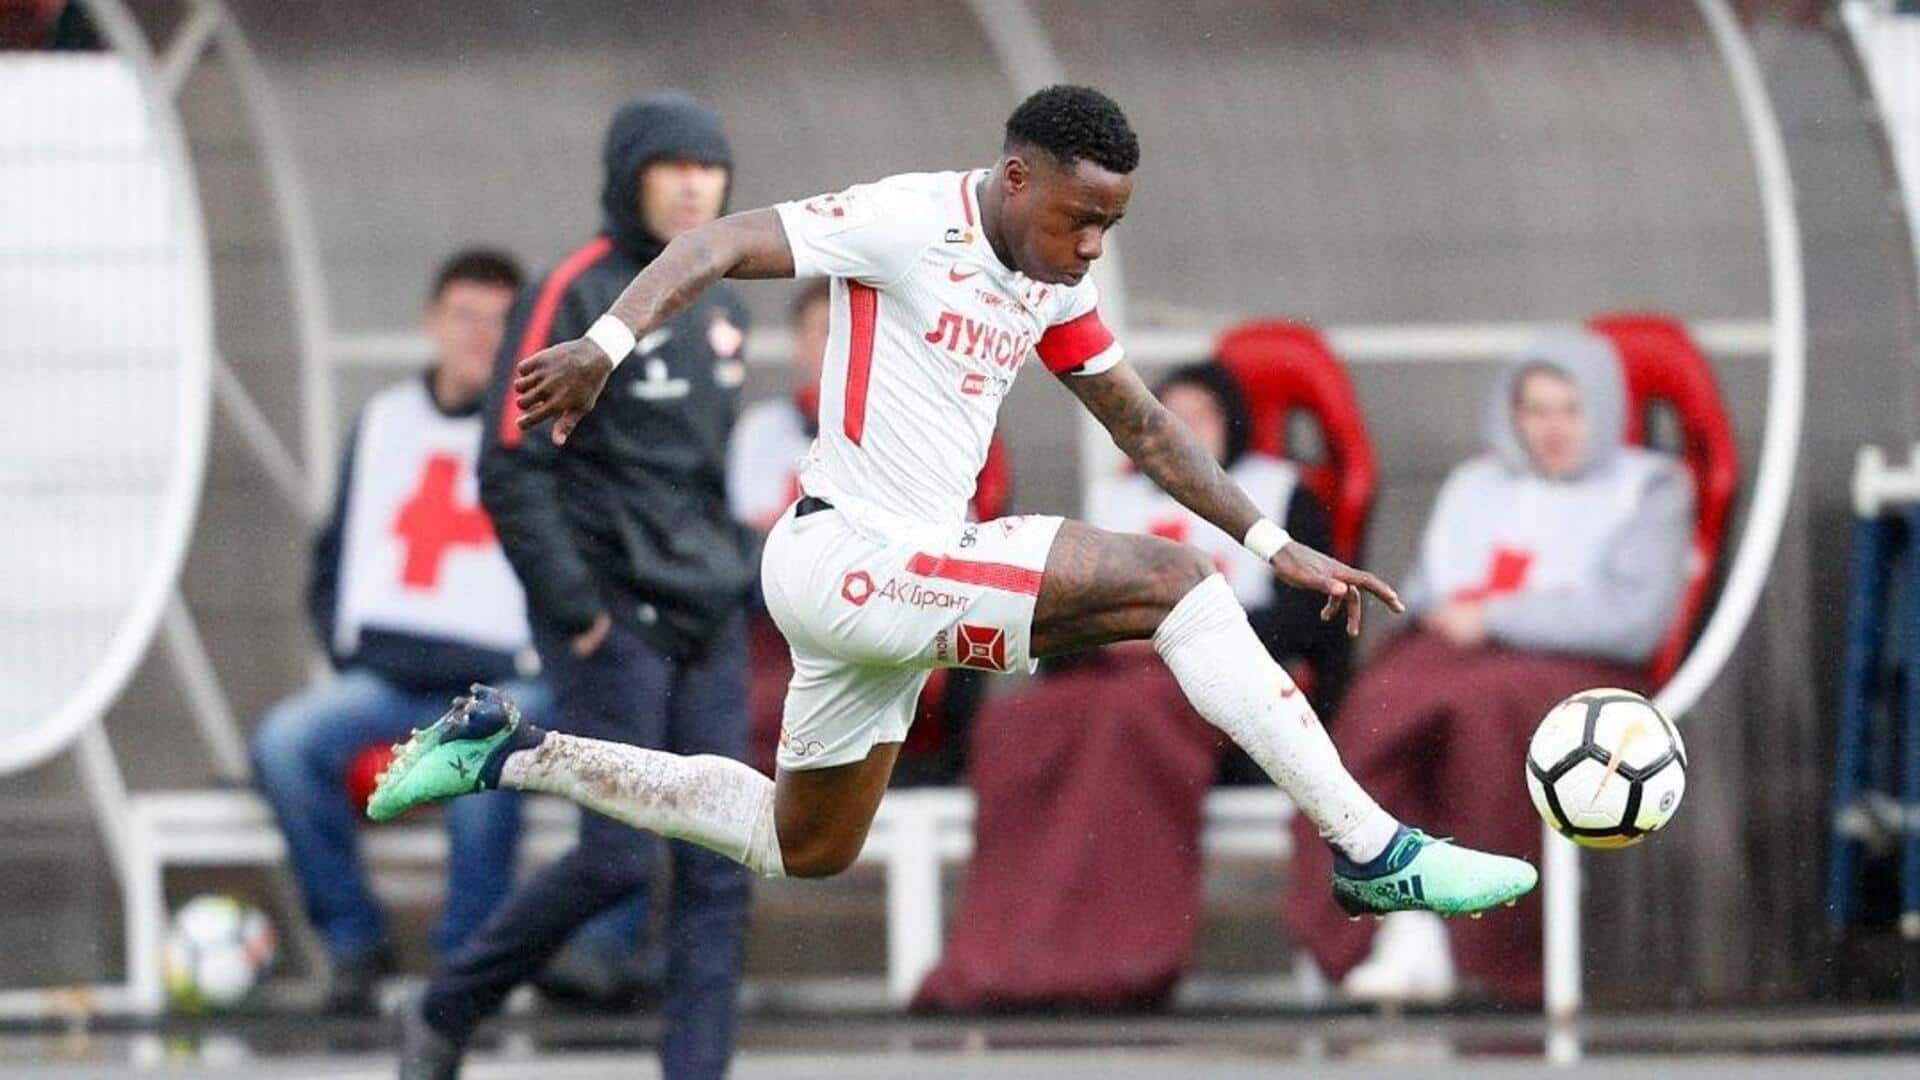 Dutch footballer Quincy Promes sentenced to jail for stabbing cousin